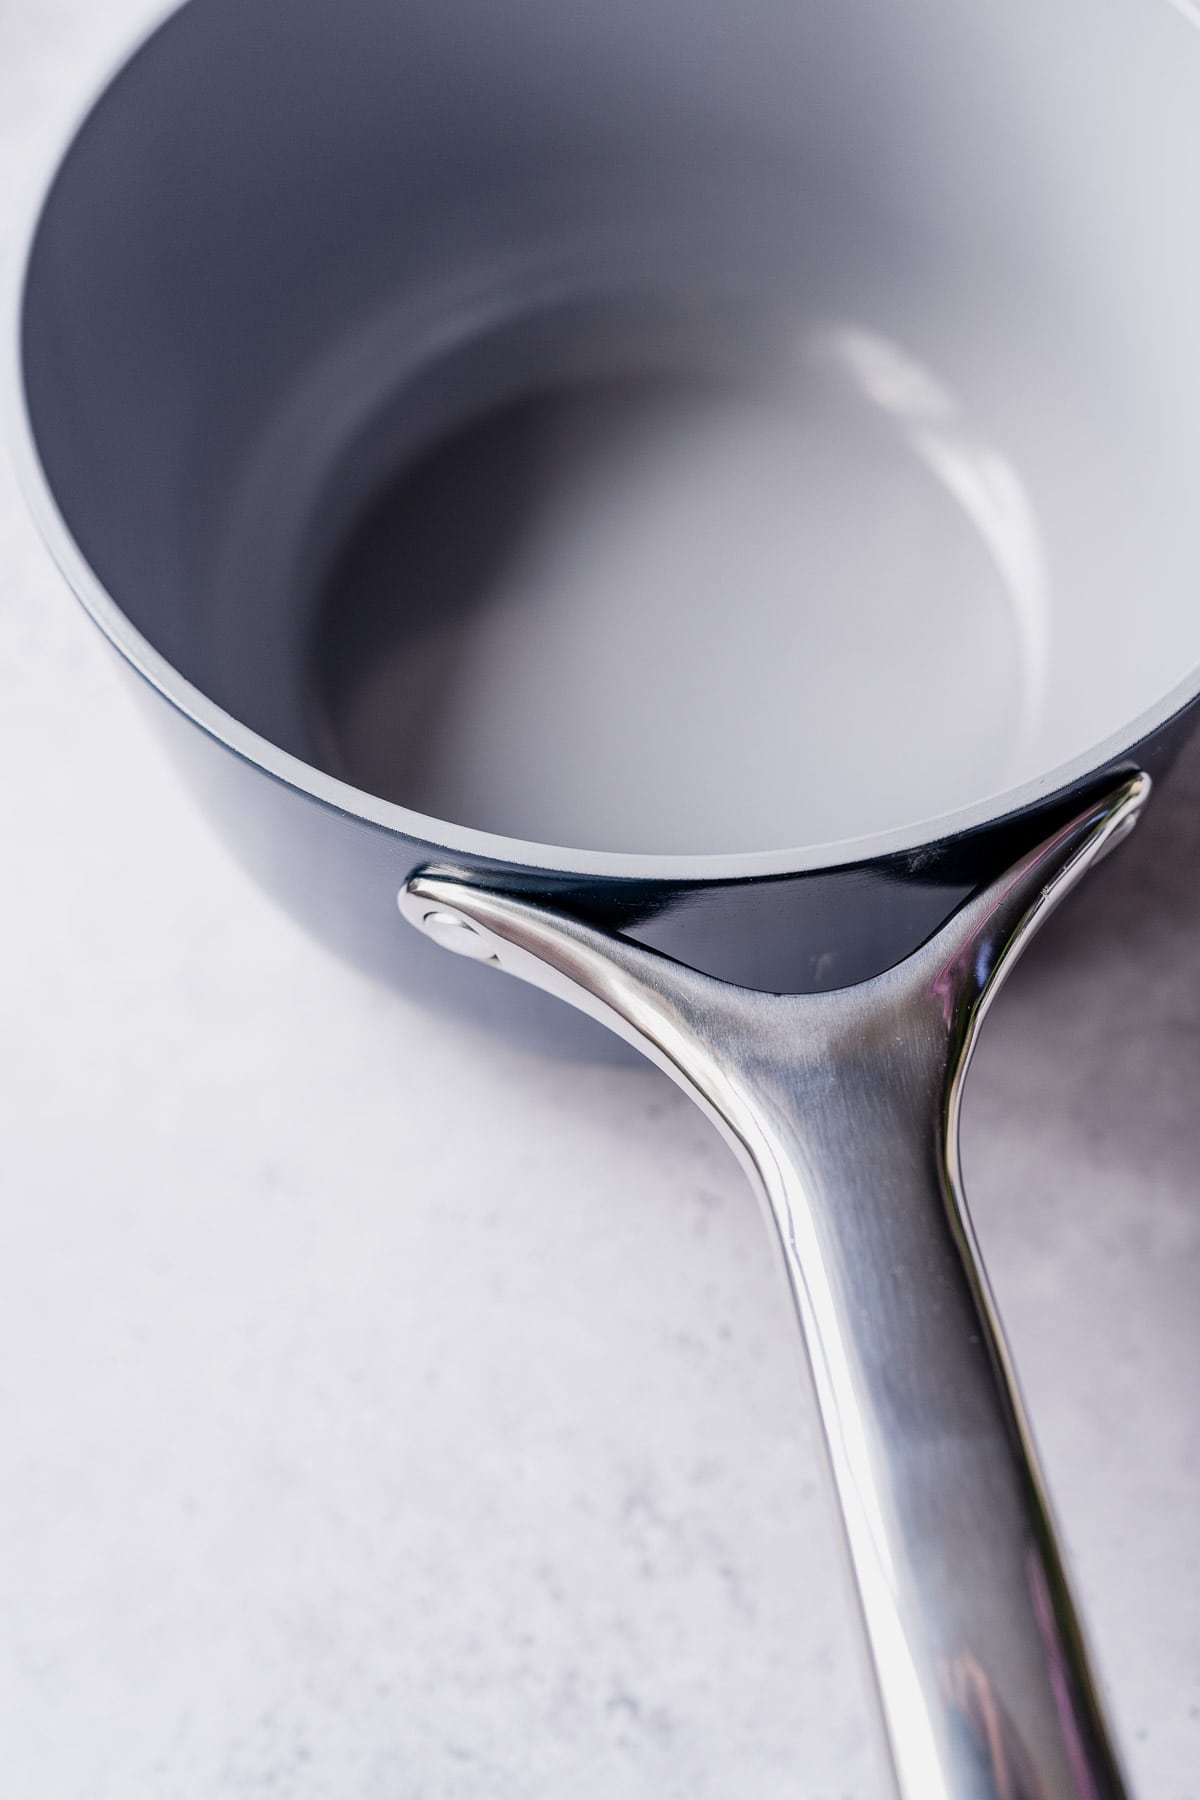 A blue and gray saucepan with a silver handle.